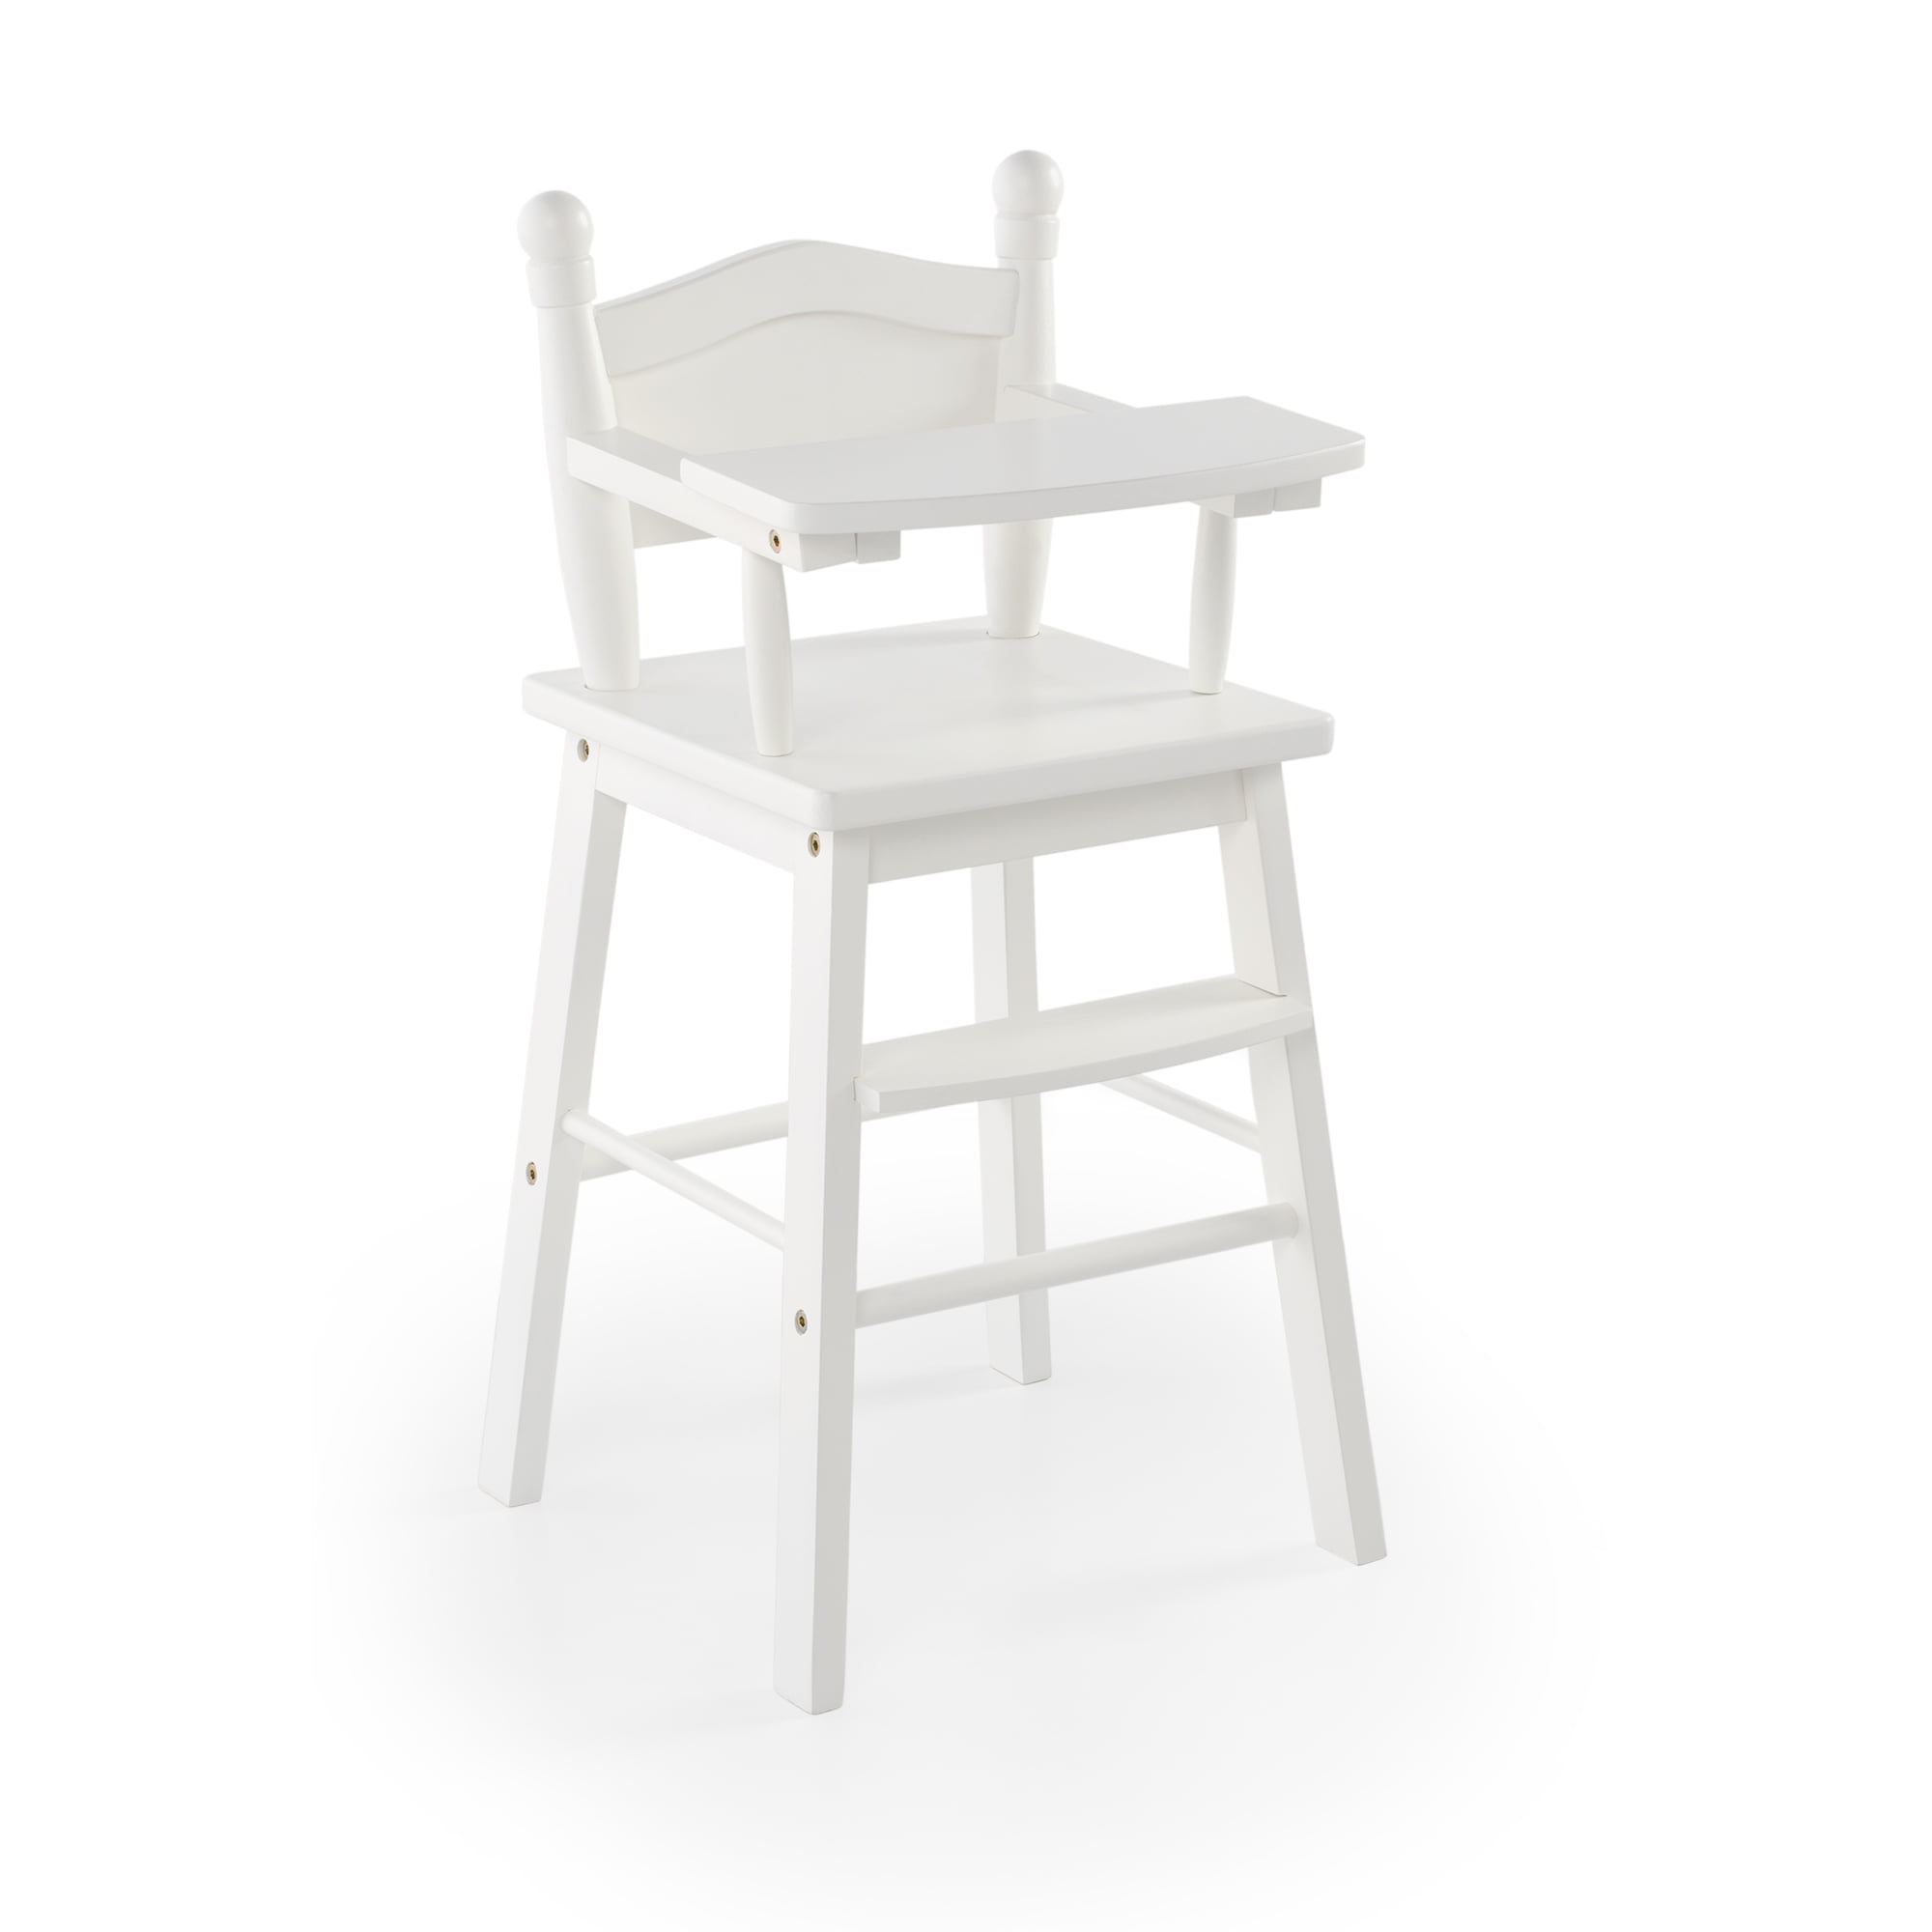 New White Moon Chair Walmart with Simple Decor